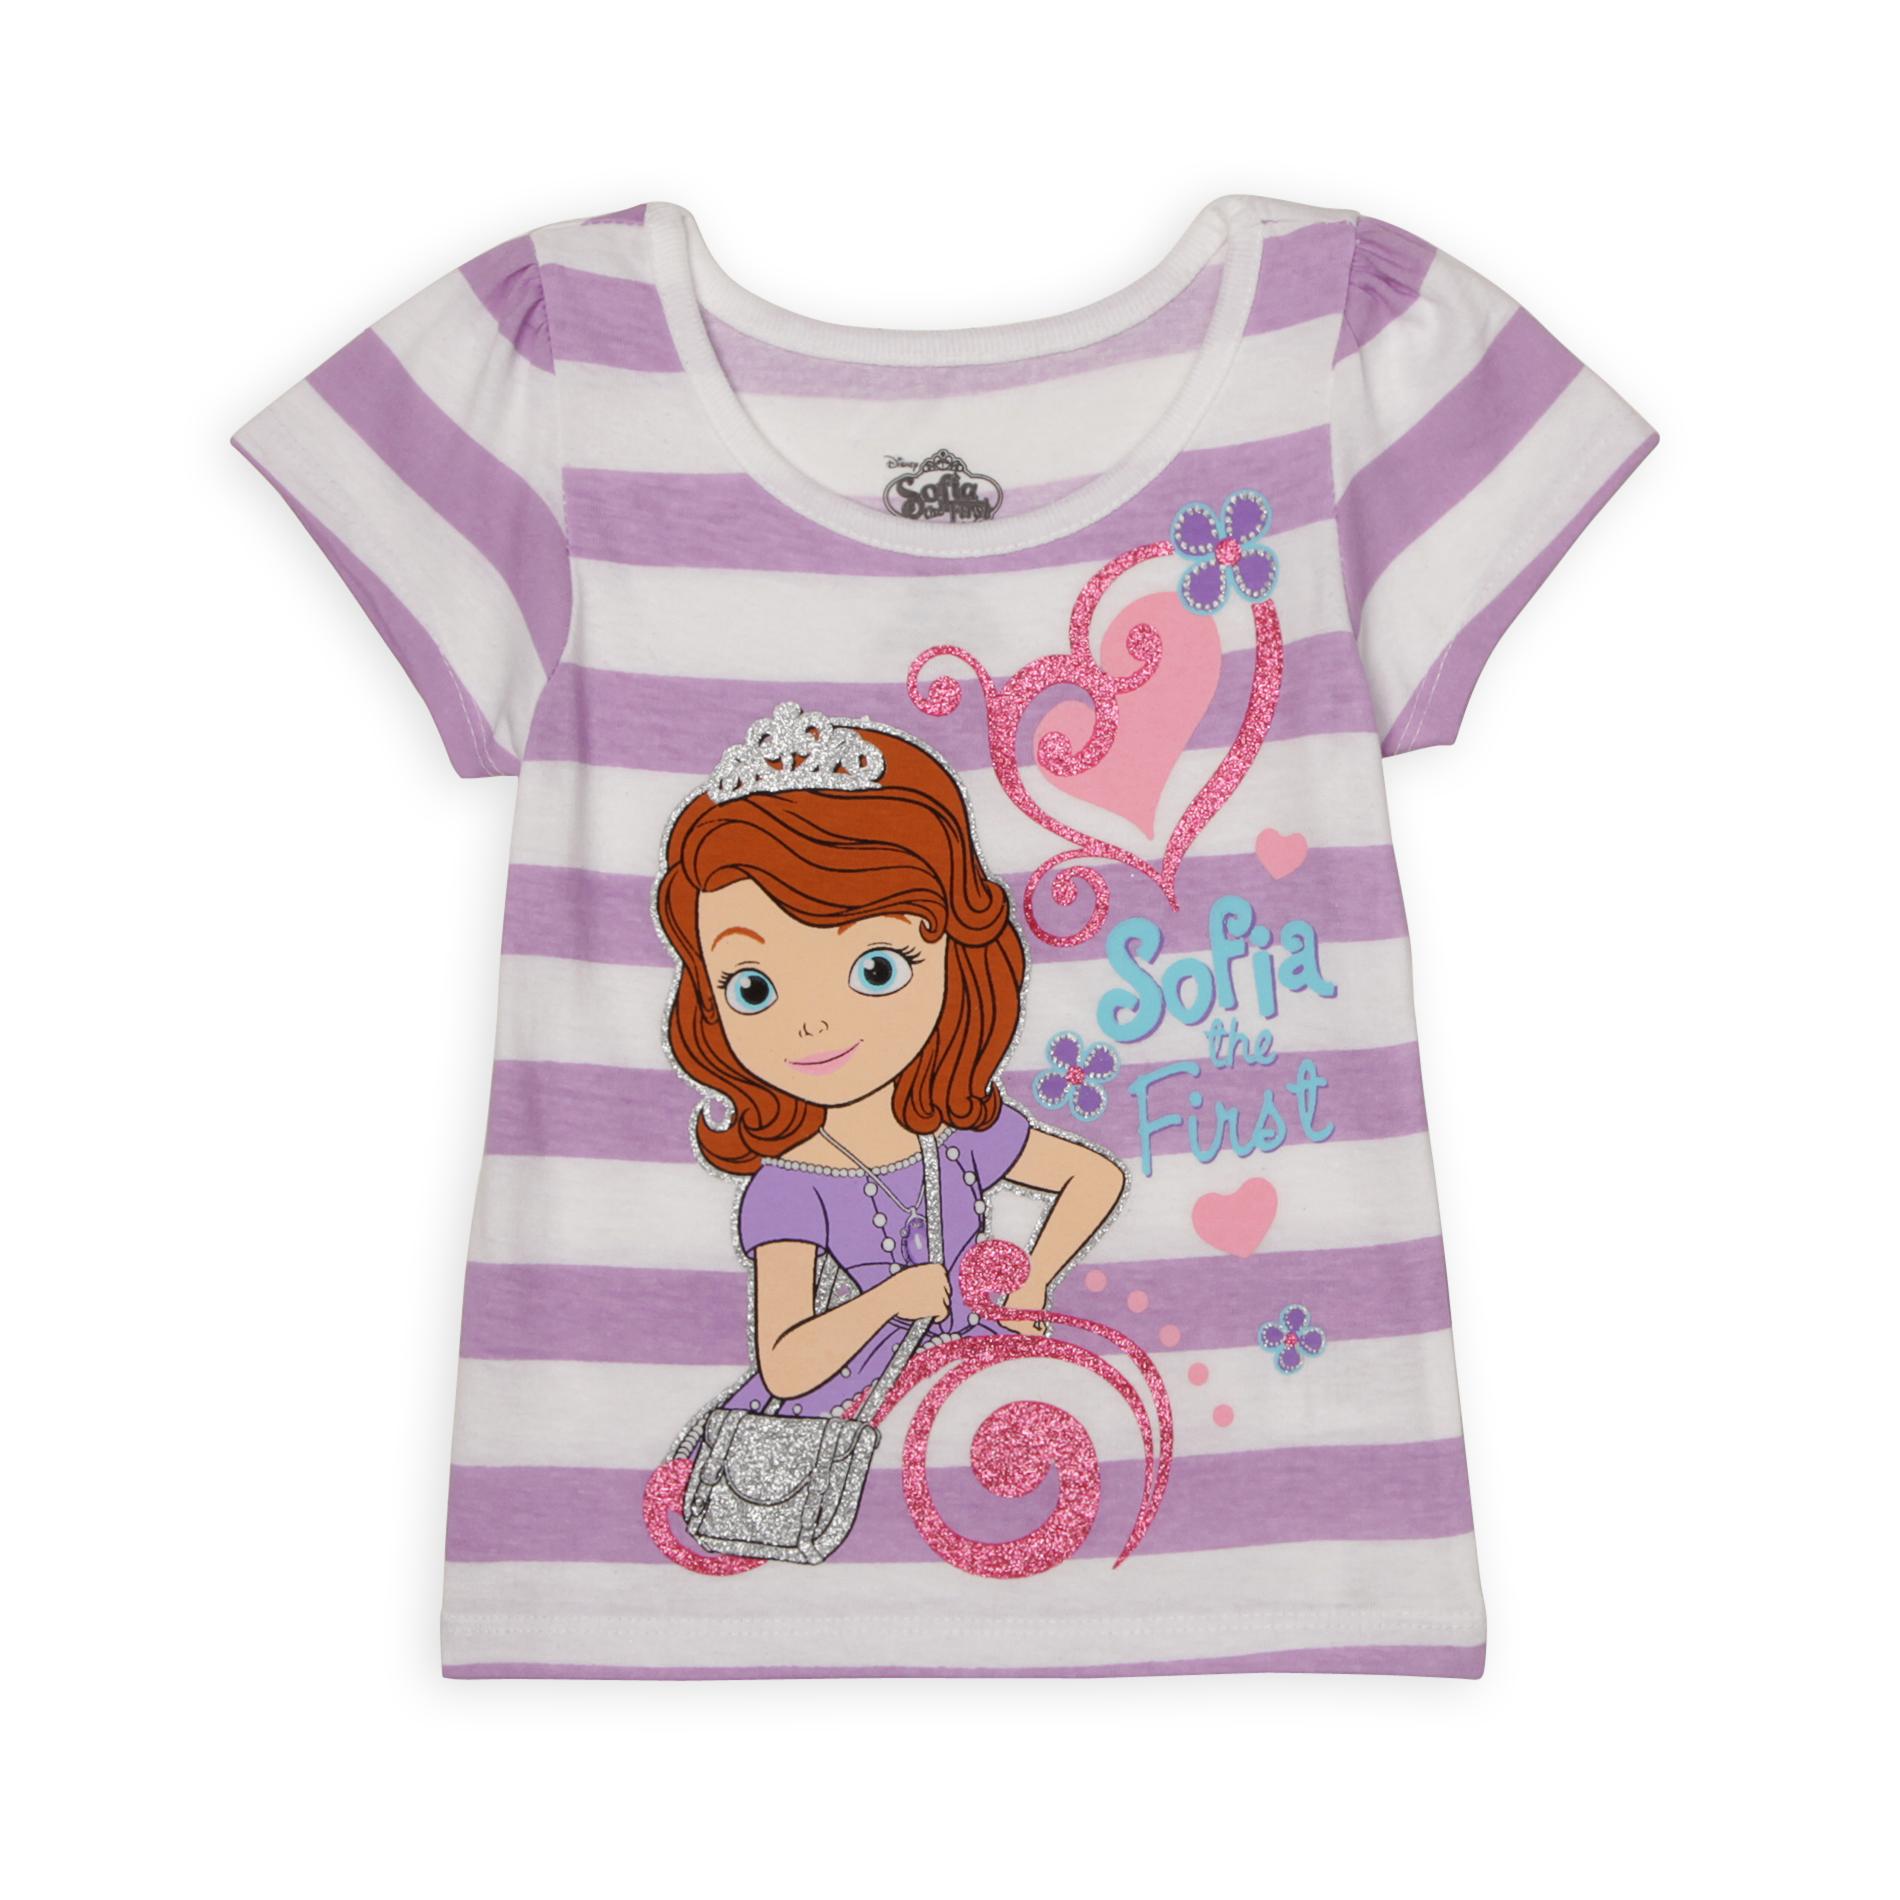 Disney Toddler Girl's Graphic Top - Sofia The First